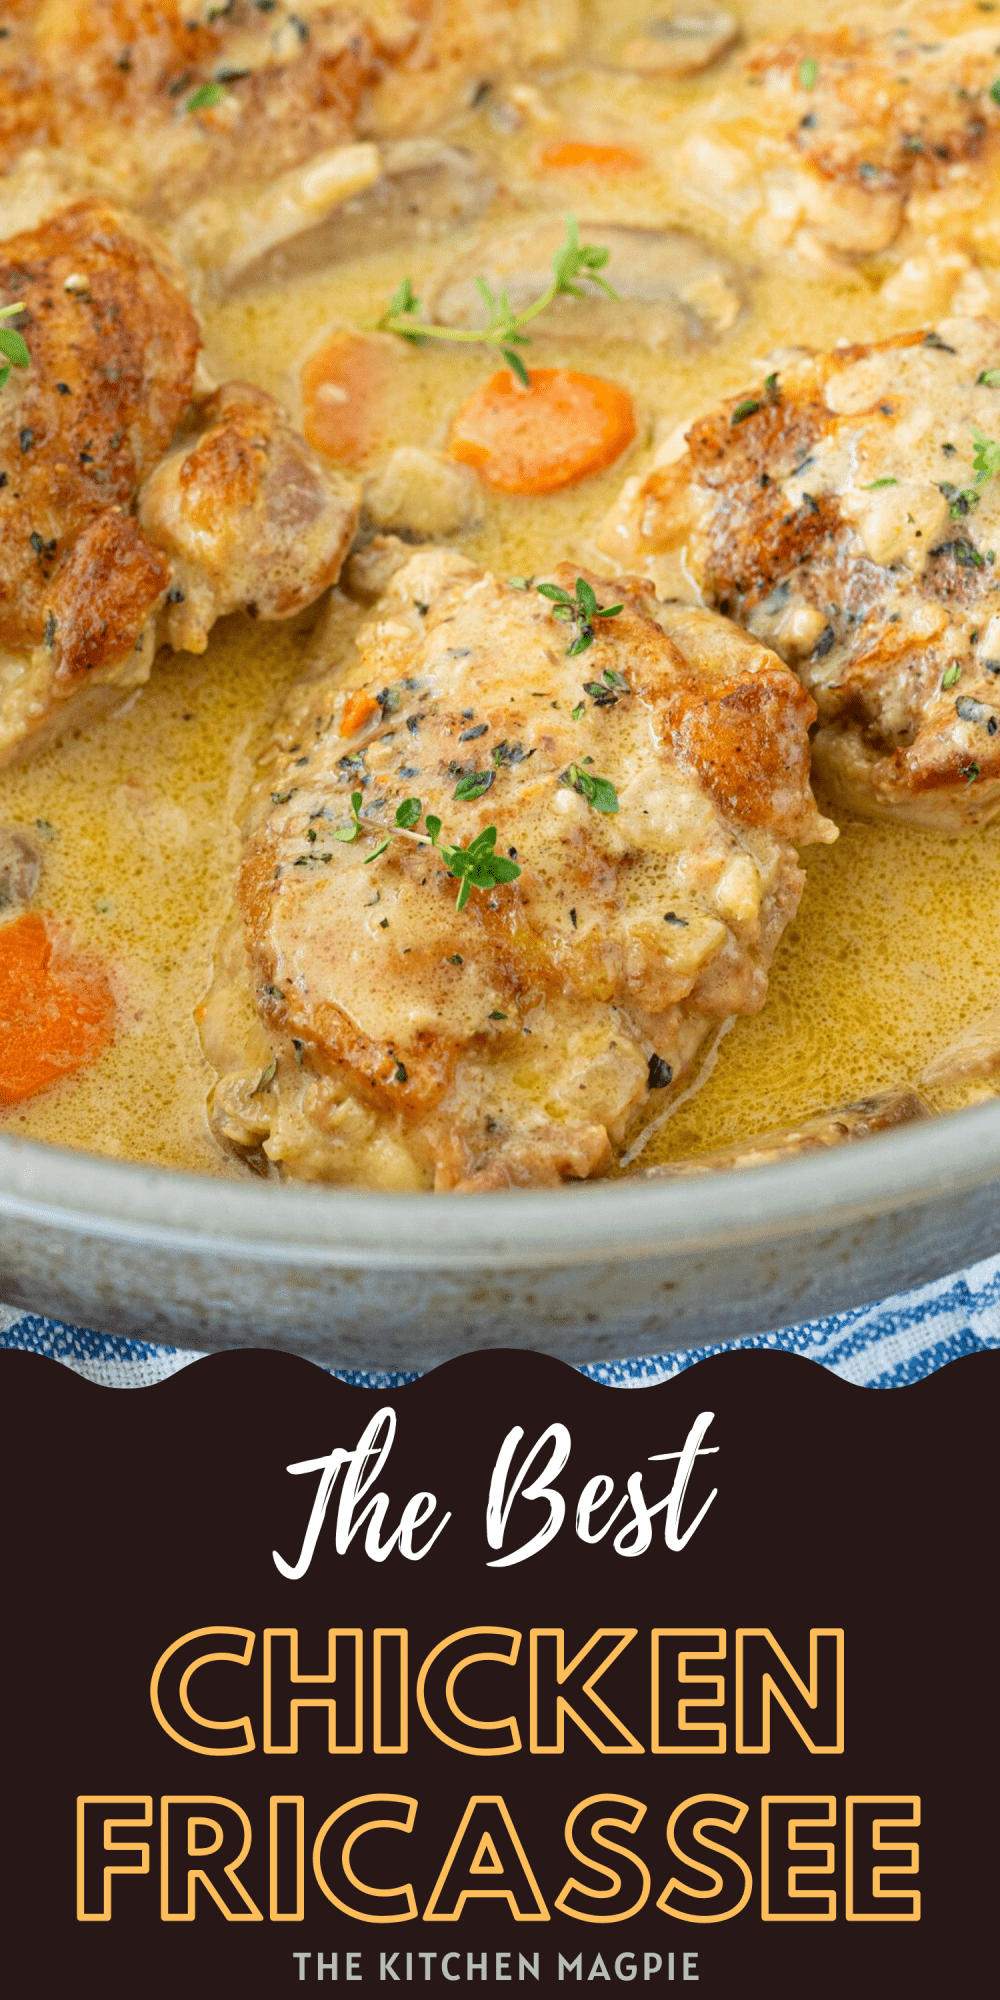 Chicken Fricassee is tender chicken braised in a creamy white wine sauce that is bursting with vegetables and flavor. Serve over mashed potatoes, rice or pasta!